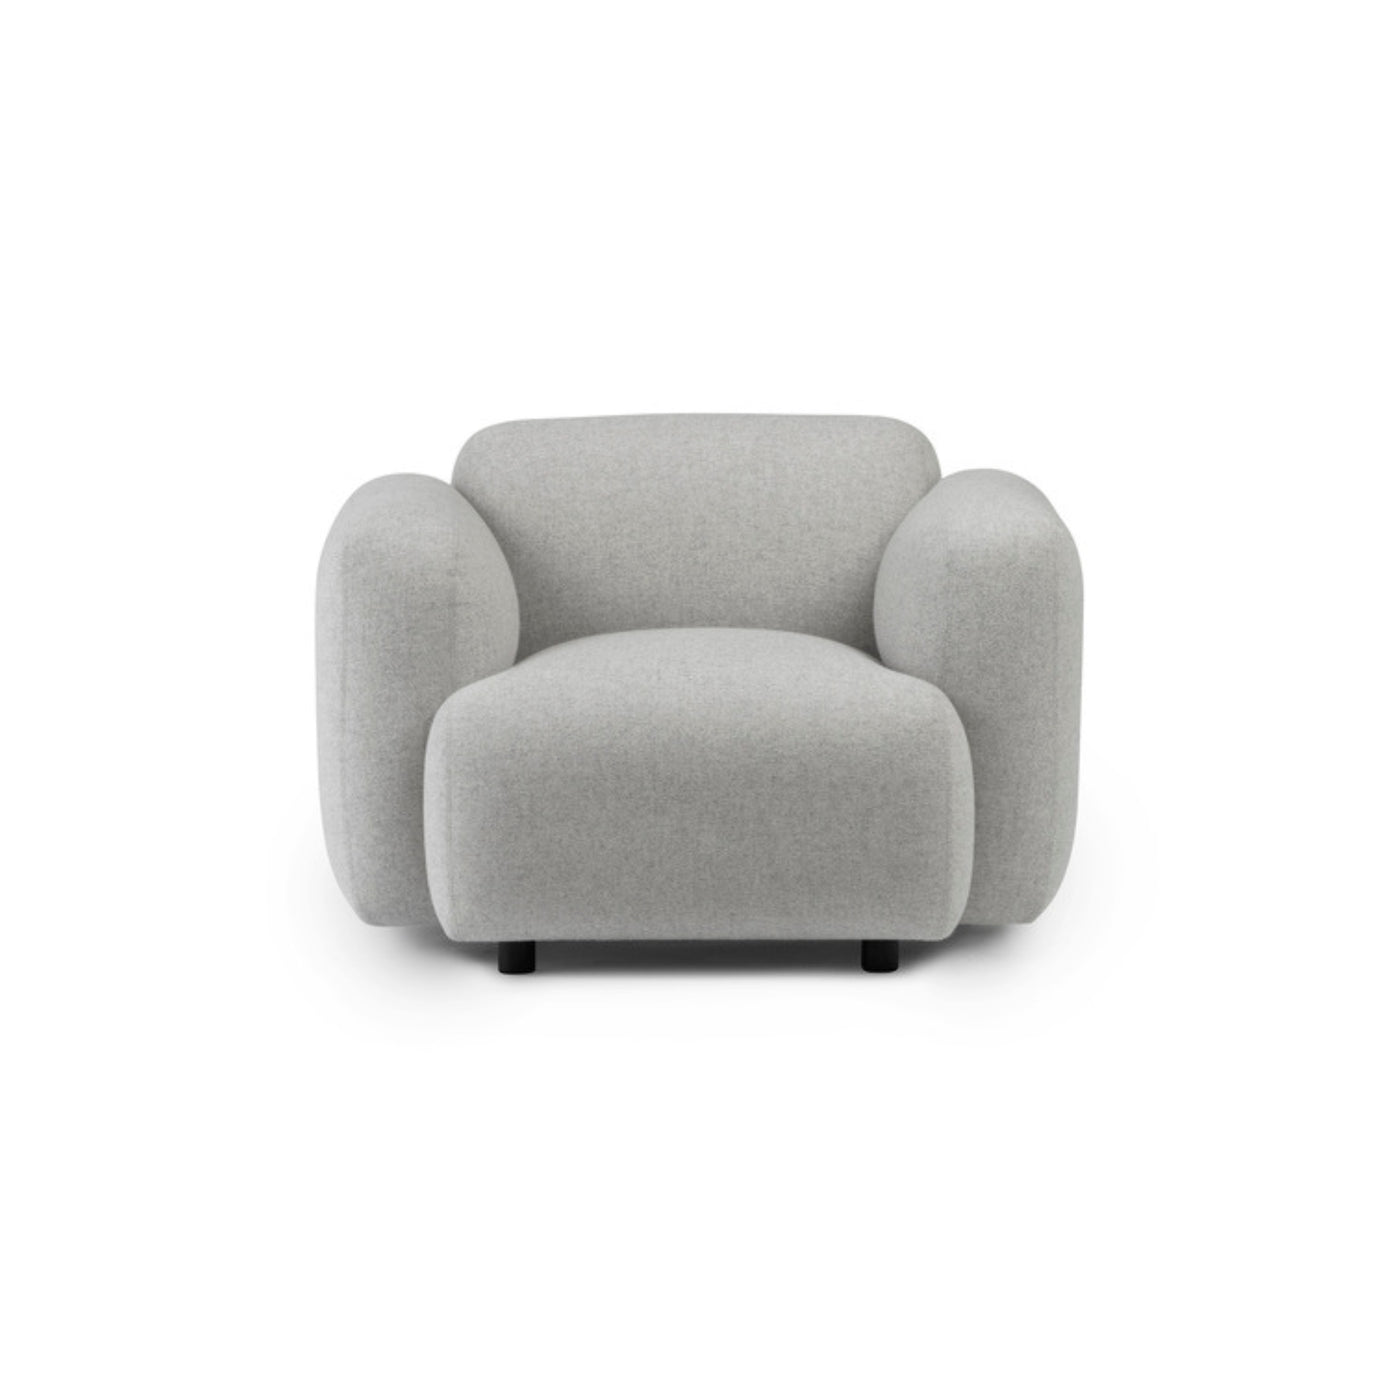 Normann Copenhagen Swell Armchair at someday designs. #colour_synergy-serendipity